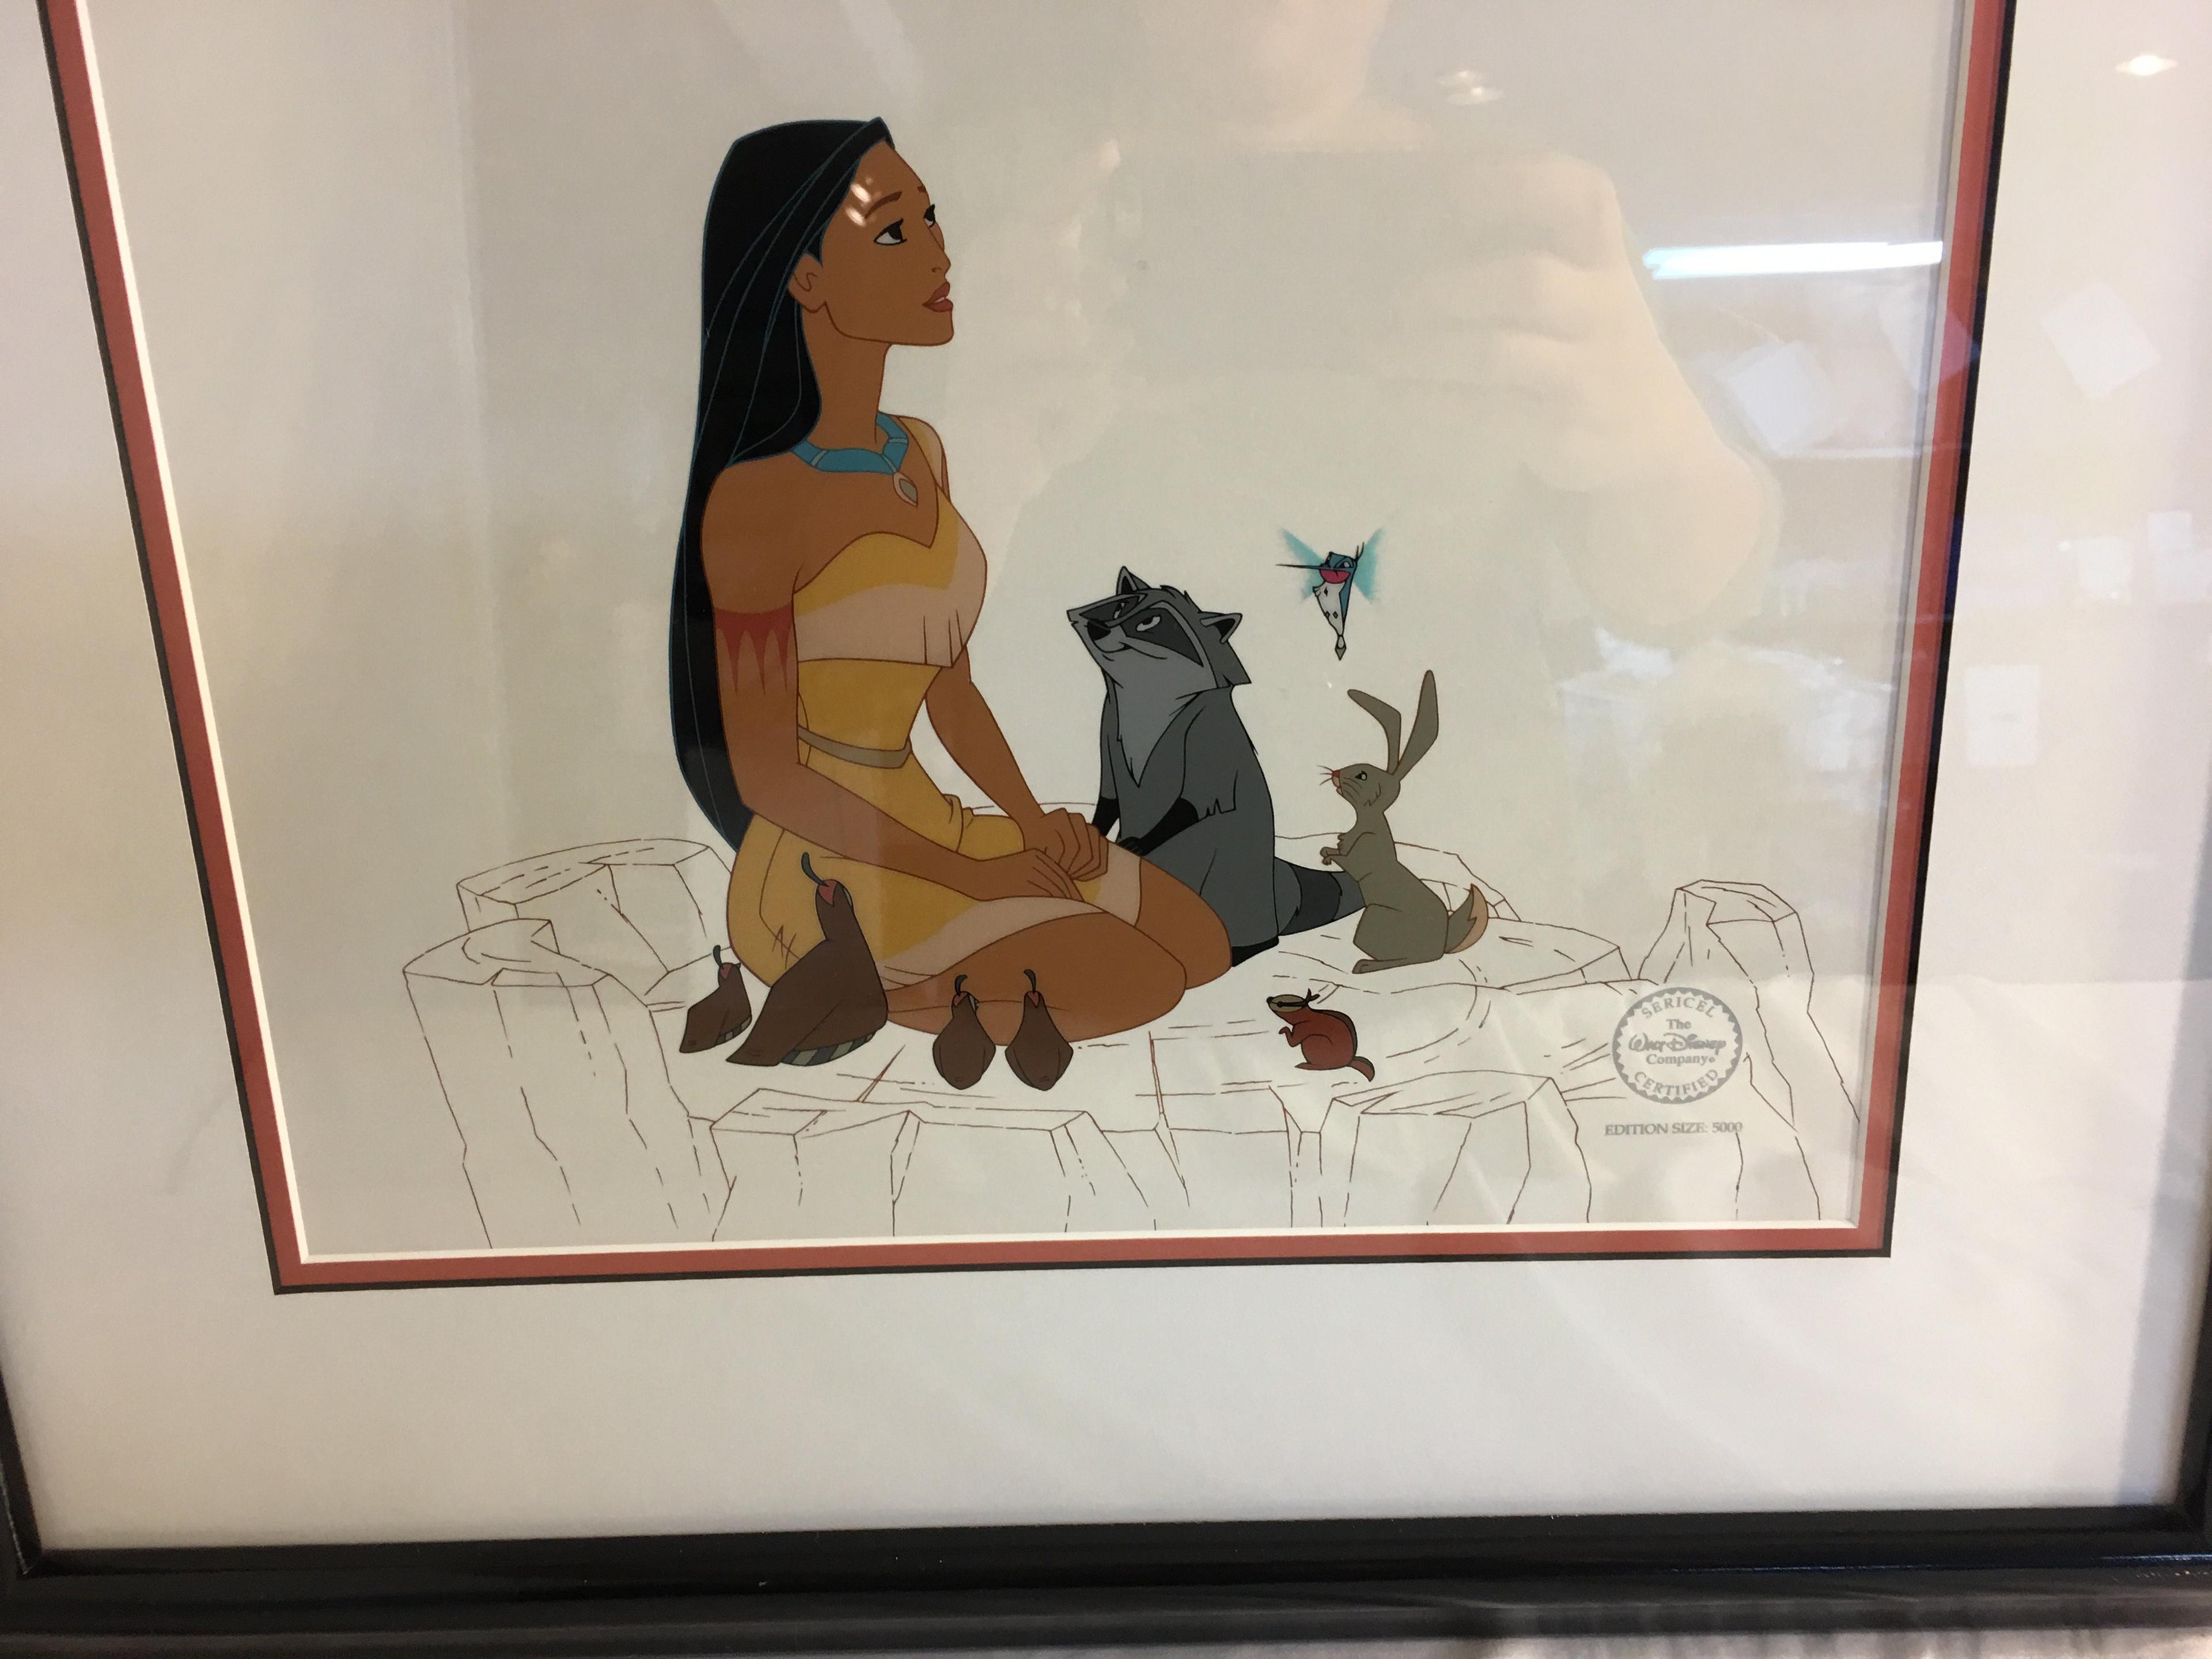 Collector The Walt Disney "Pocahontas" Edition Size:5000 Sericel W/COA In Frame Size:18.5"x22"